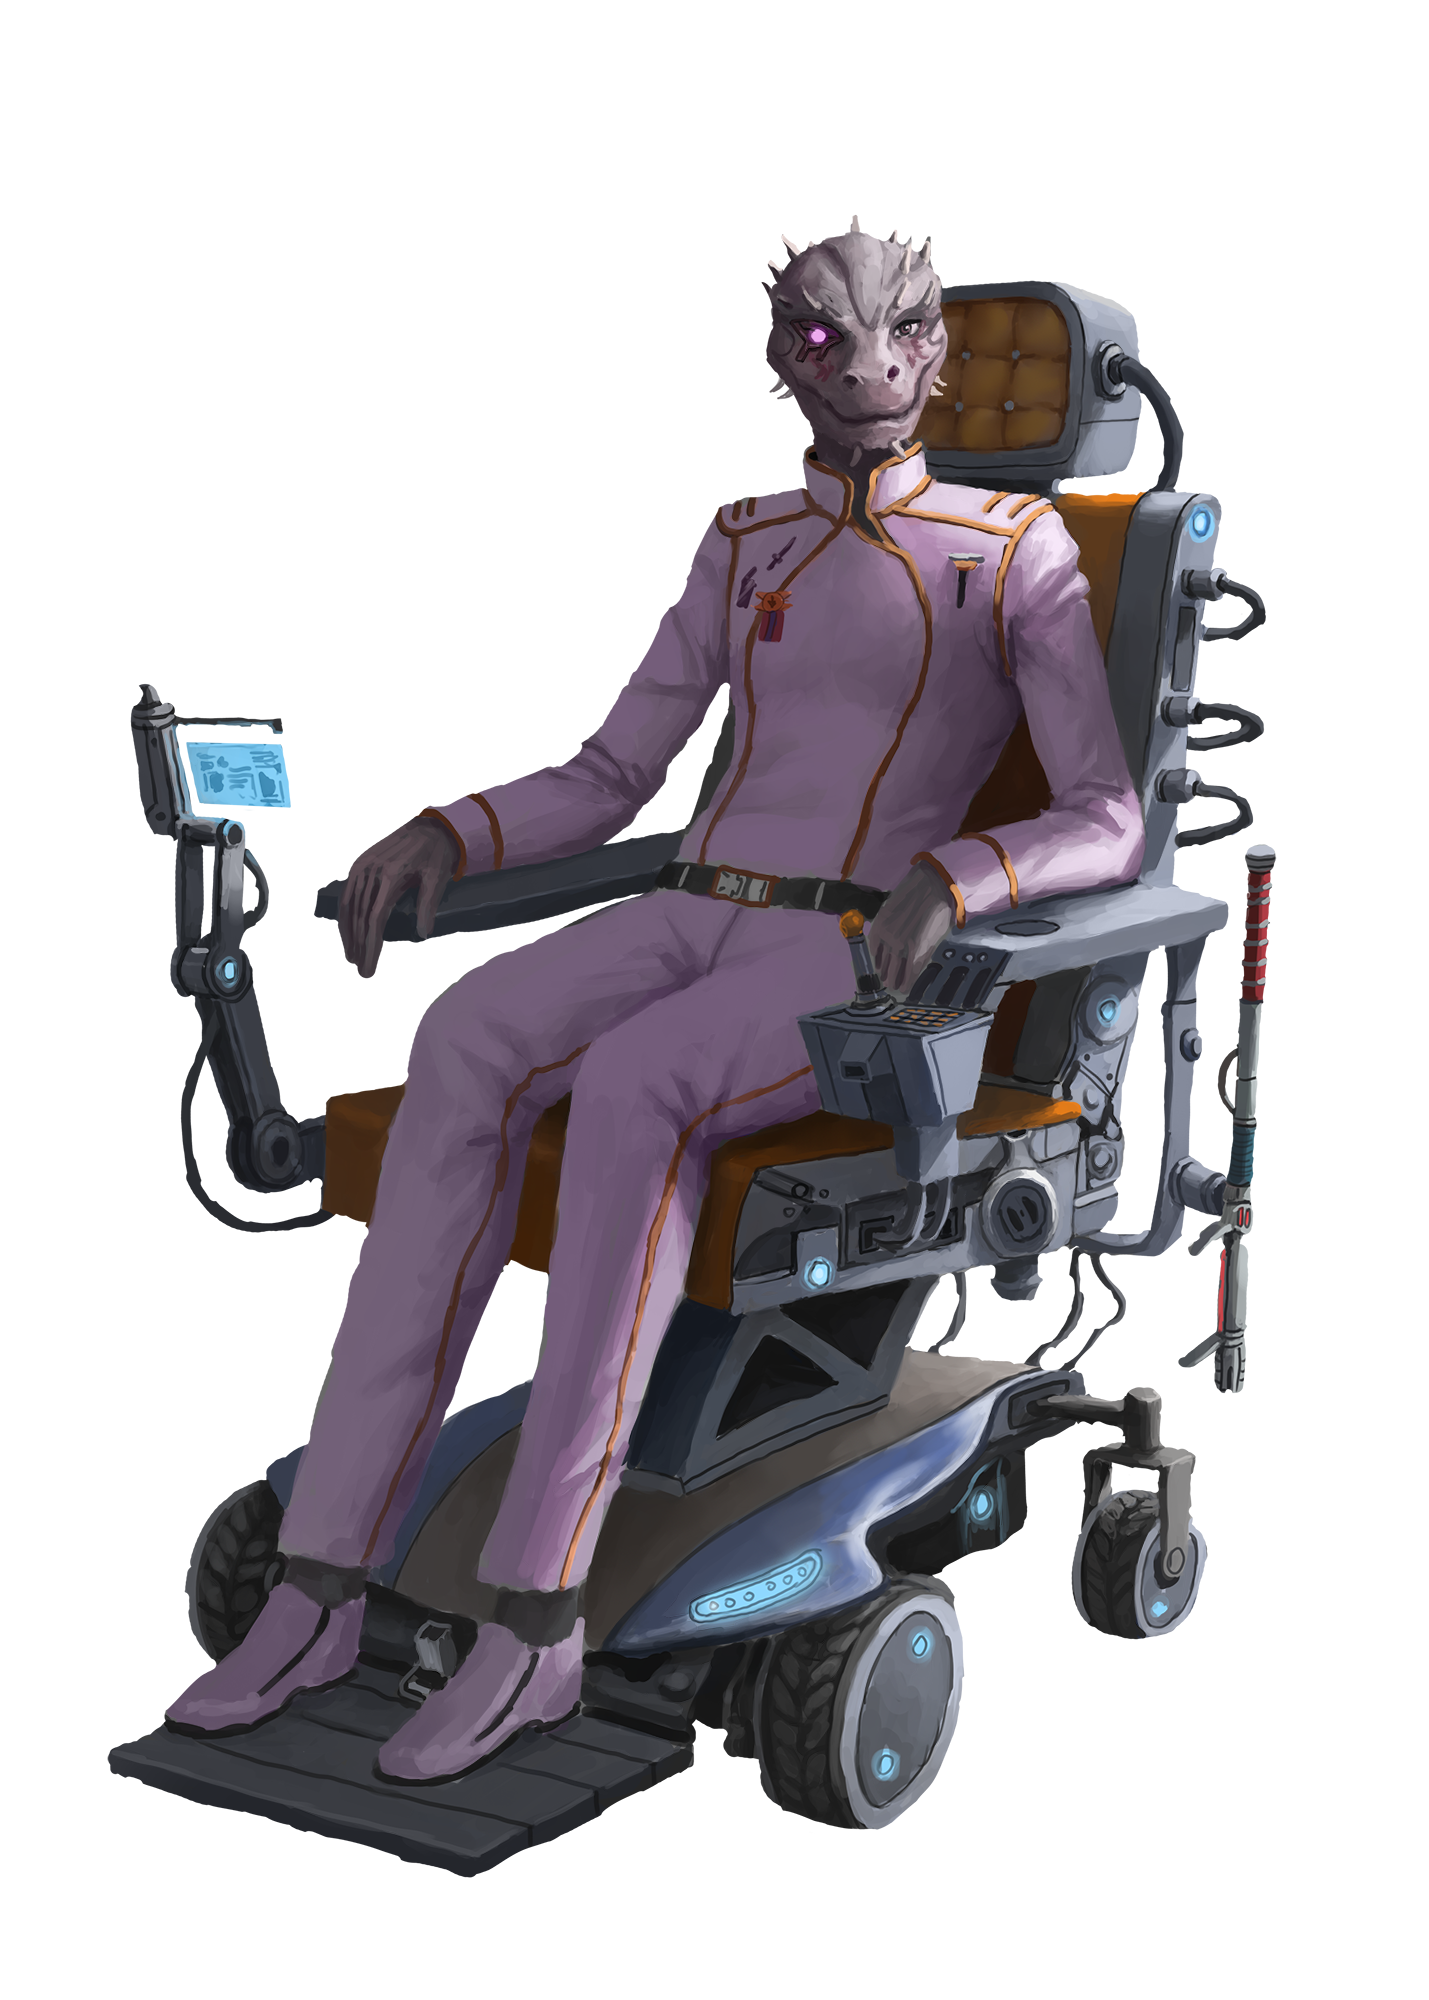 Tassada Kor, Illustration by Milos Rocenovic: A vesk in a white uniform with gold trim, sitting in a high backed automated wheelchair